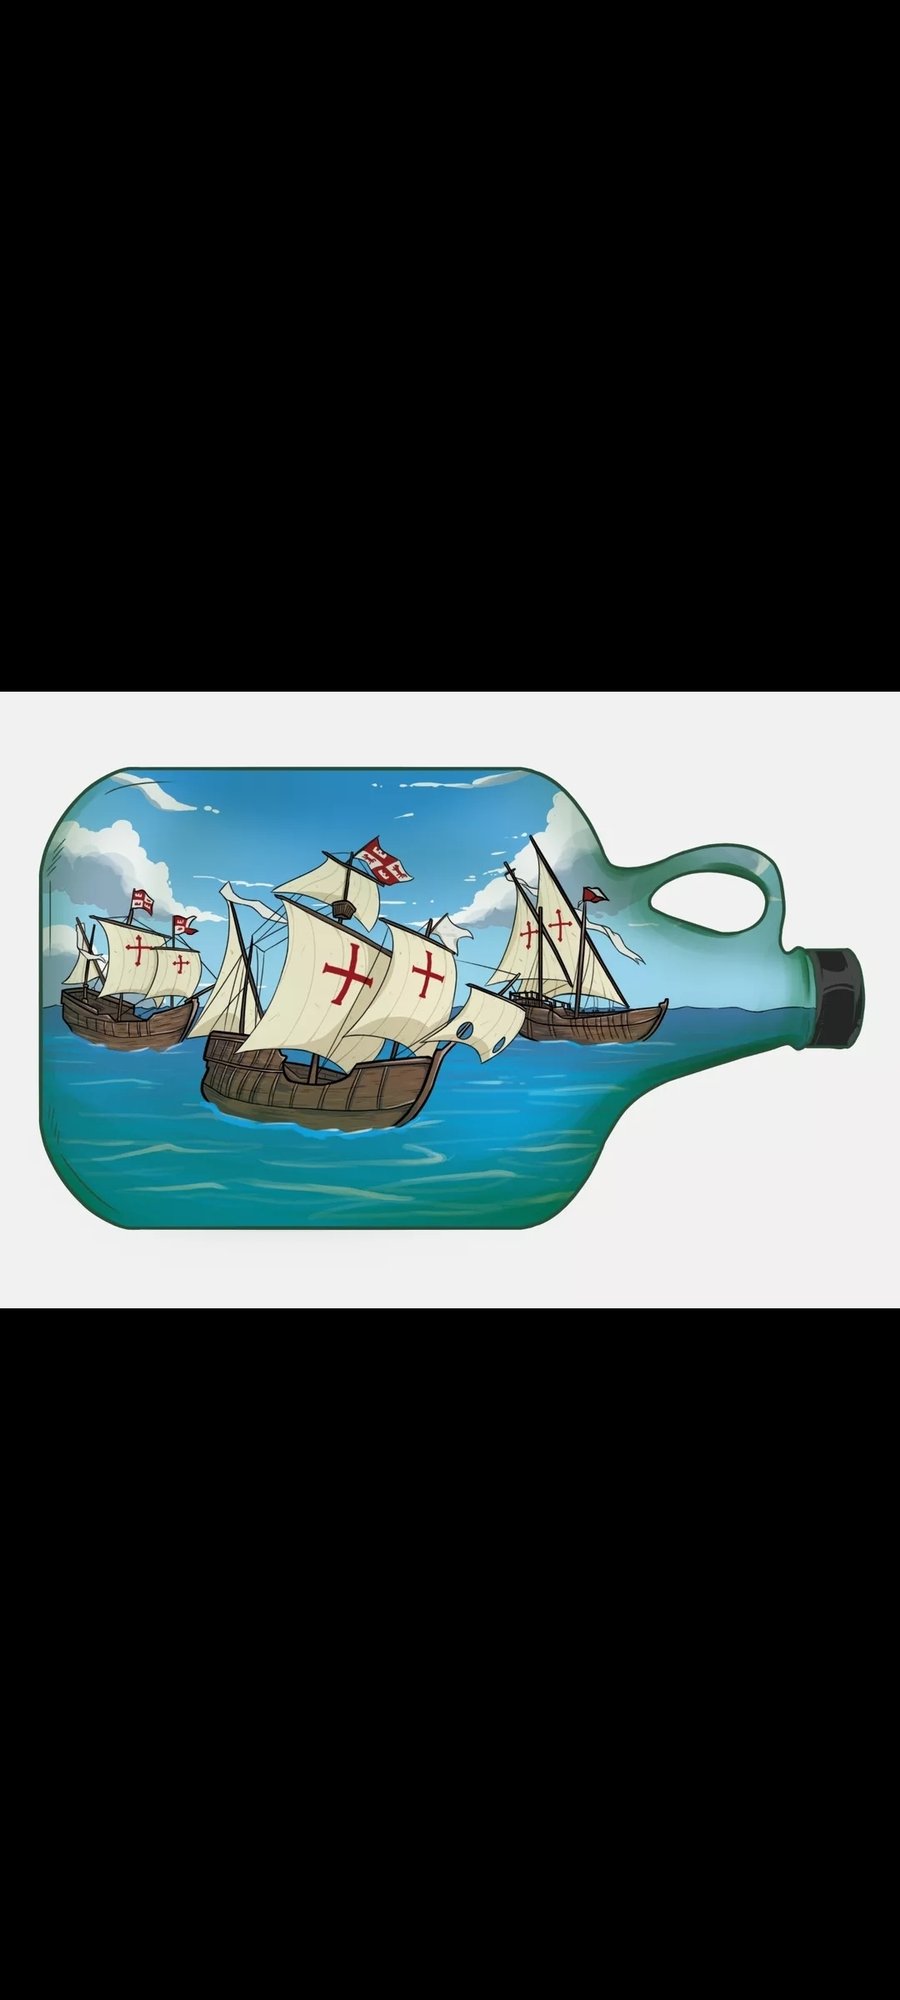 Image of Ship in a bottle series 2 Version 14 "1492"